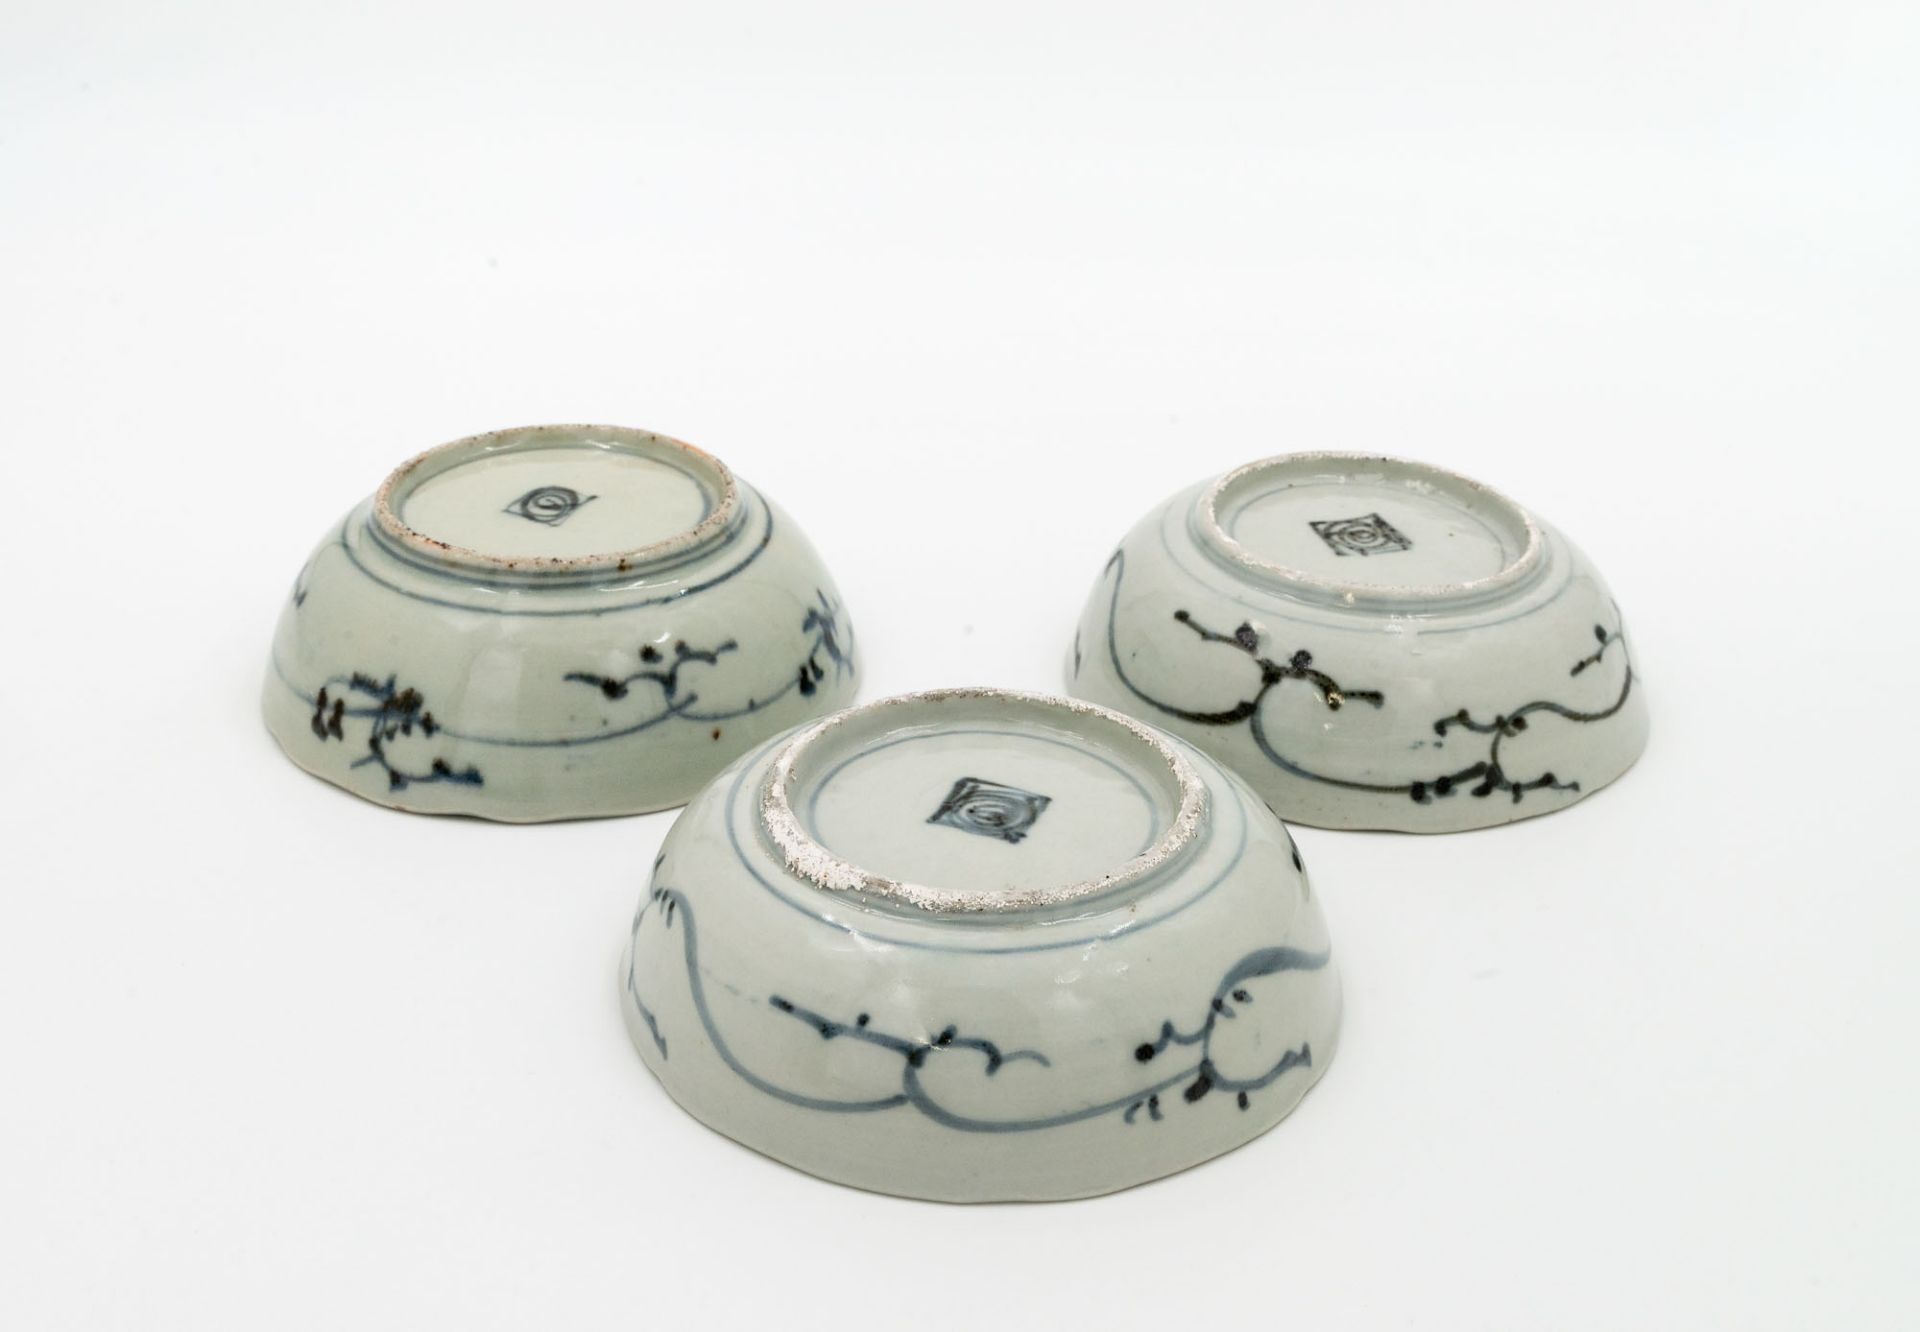 Three Blue and White Porcelain Swatow Deep Plates in the Yongle Style, China, Mid 19th Century - Image 2 of 3